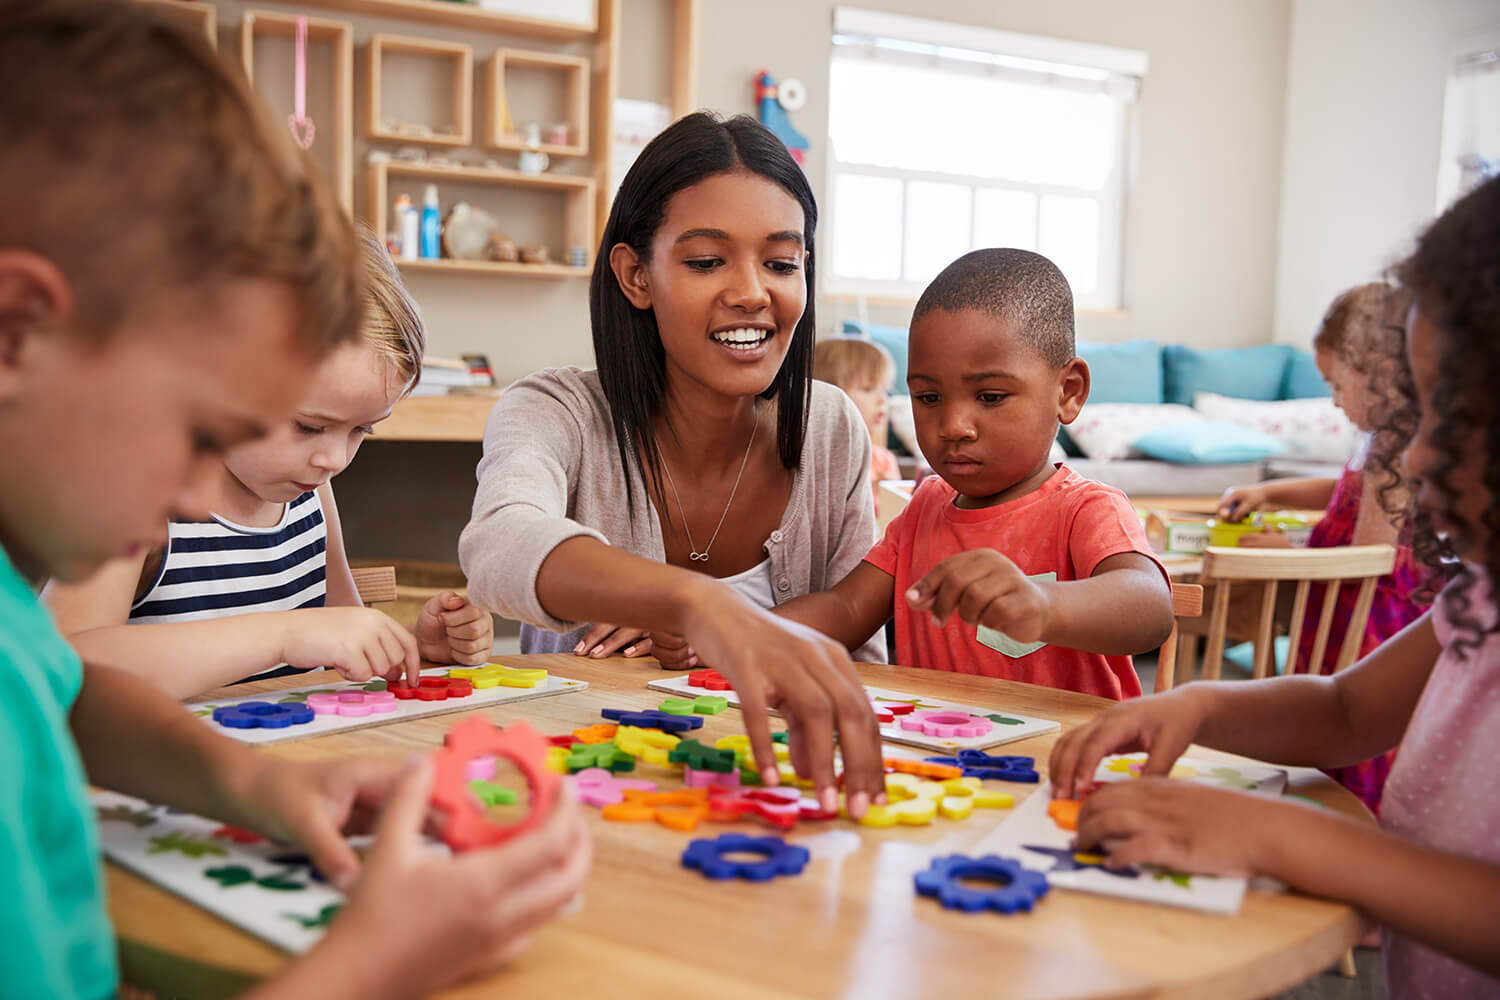 Preschool teacher assisting multiple children around a table with shapes